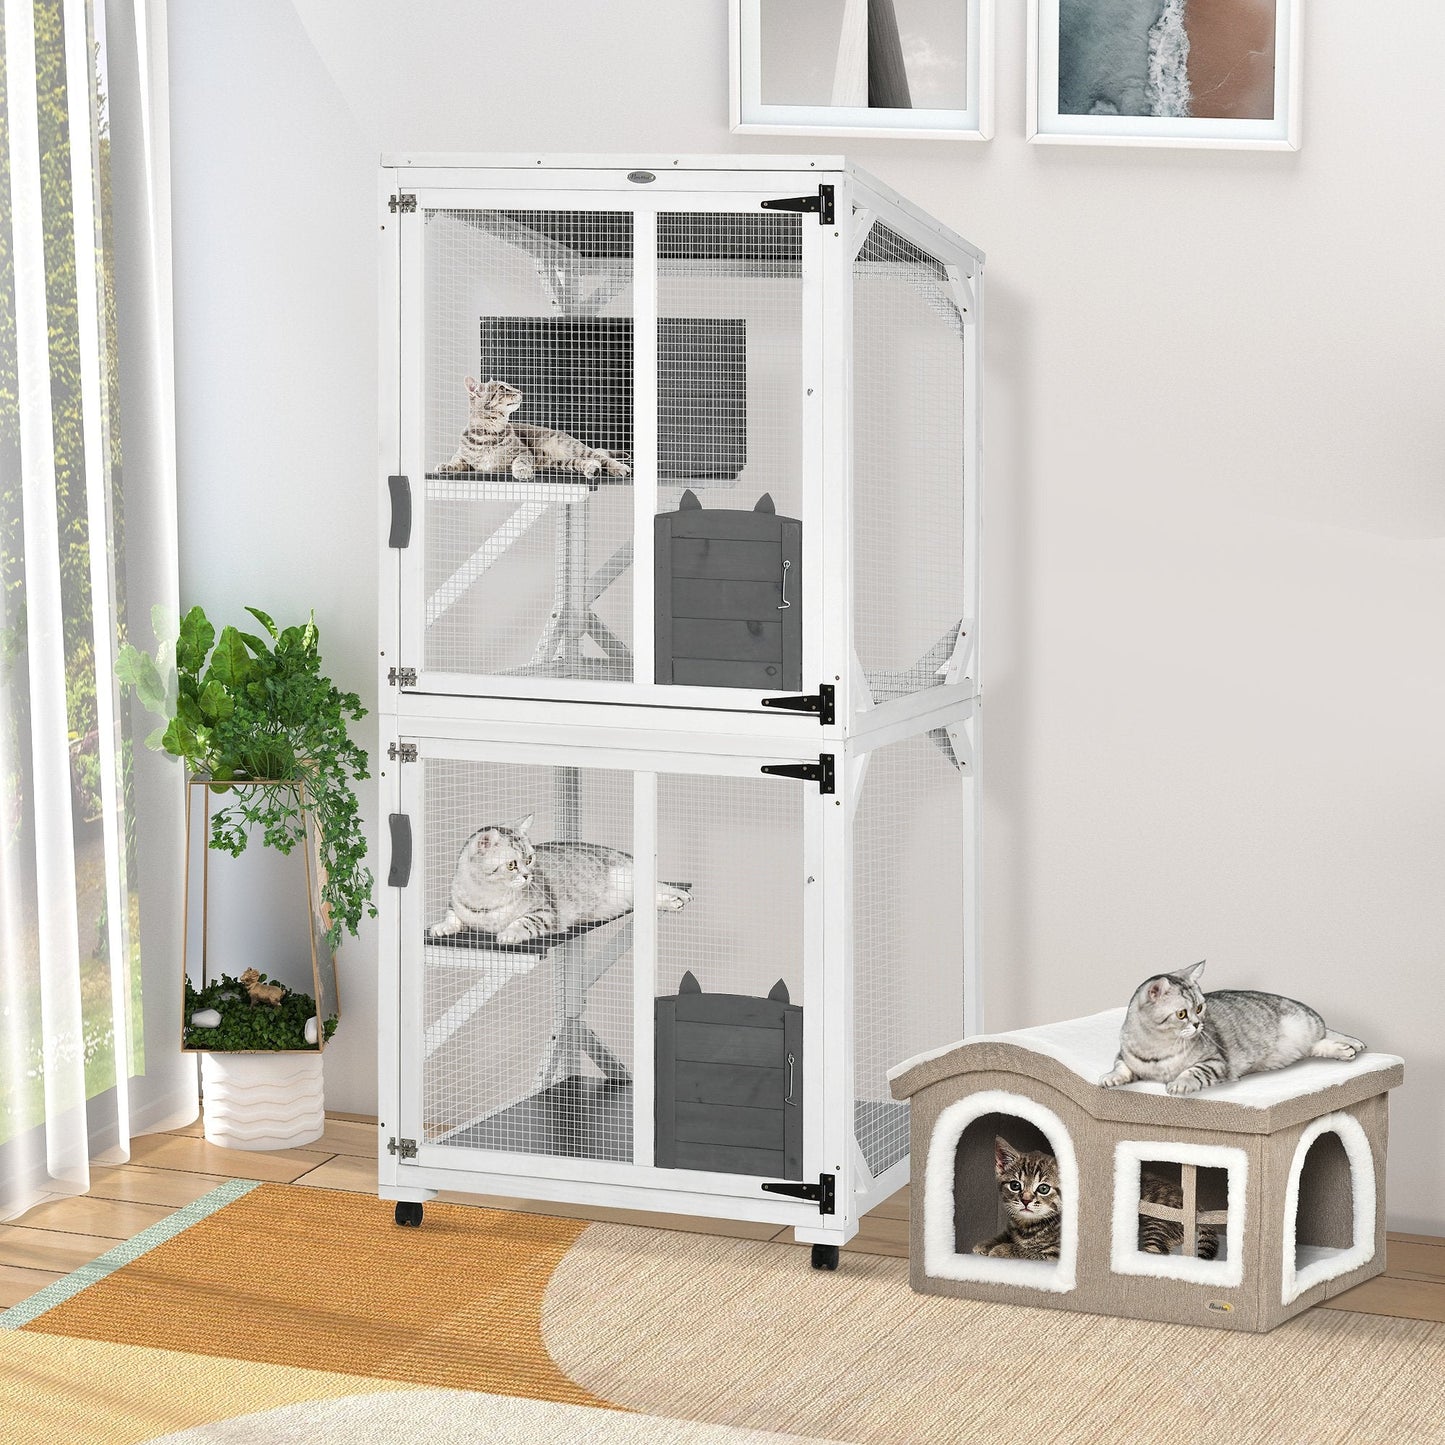 Catio Outdoor, Large Cat Enclosure, Wooden Kitten House, Elevated Design, with Wheels, Resting Box, Water-Resistant, Multi Platforms, for 1-3 Cats at Gallery Canada